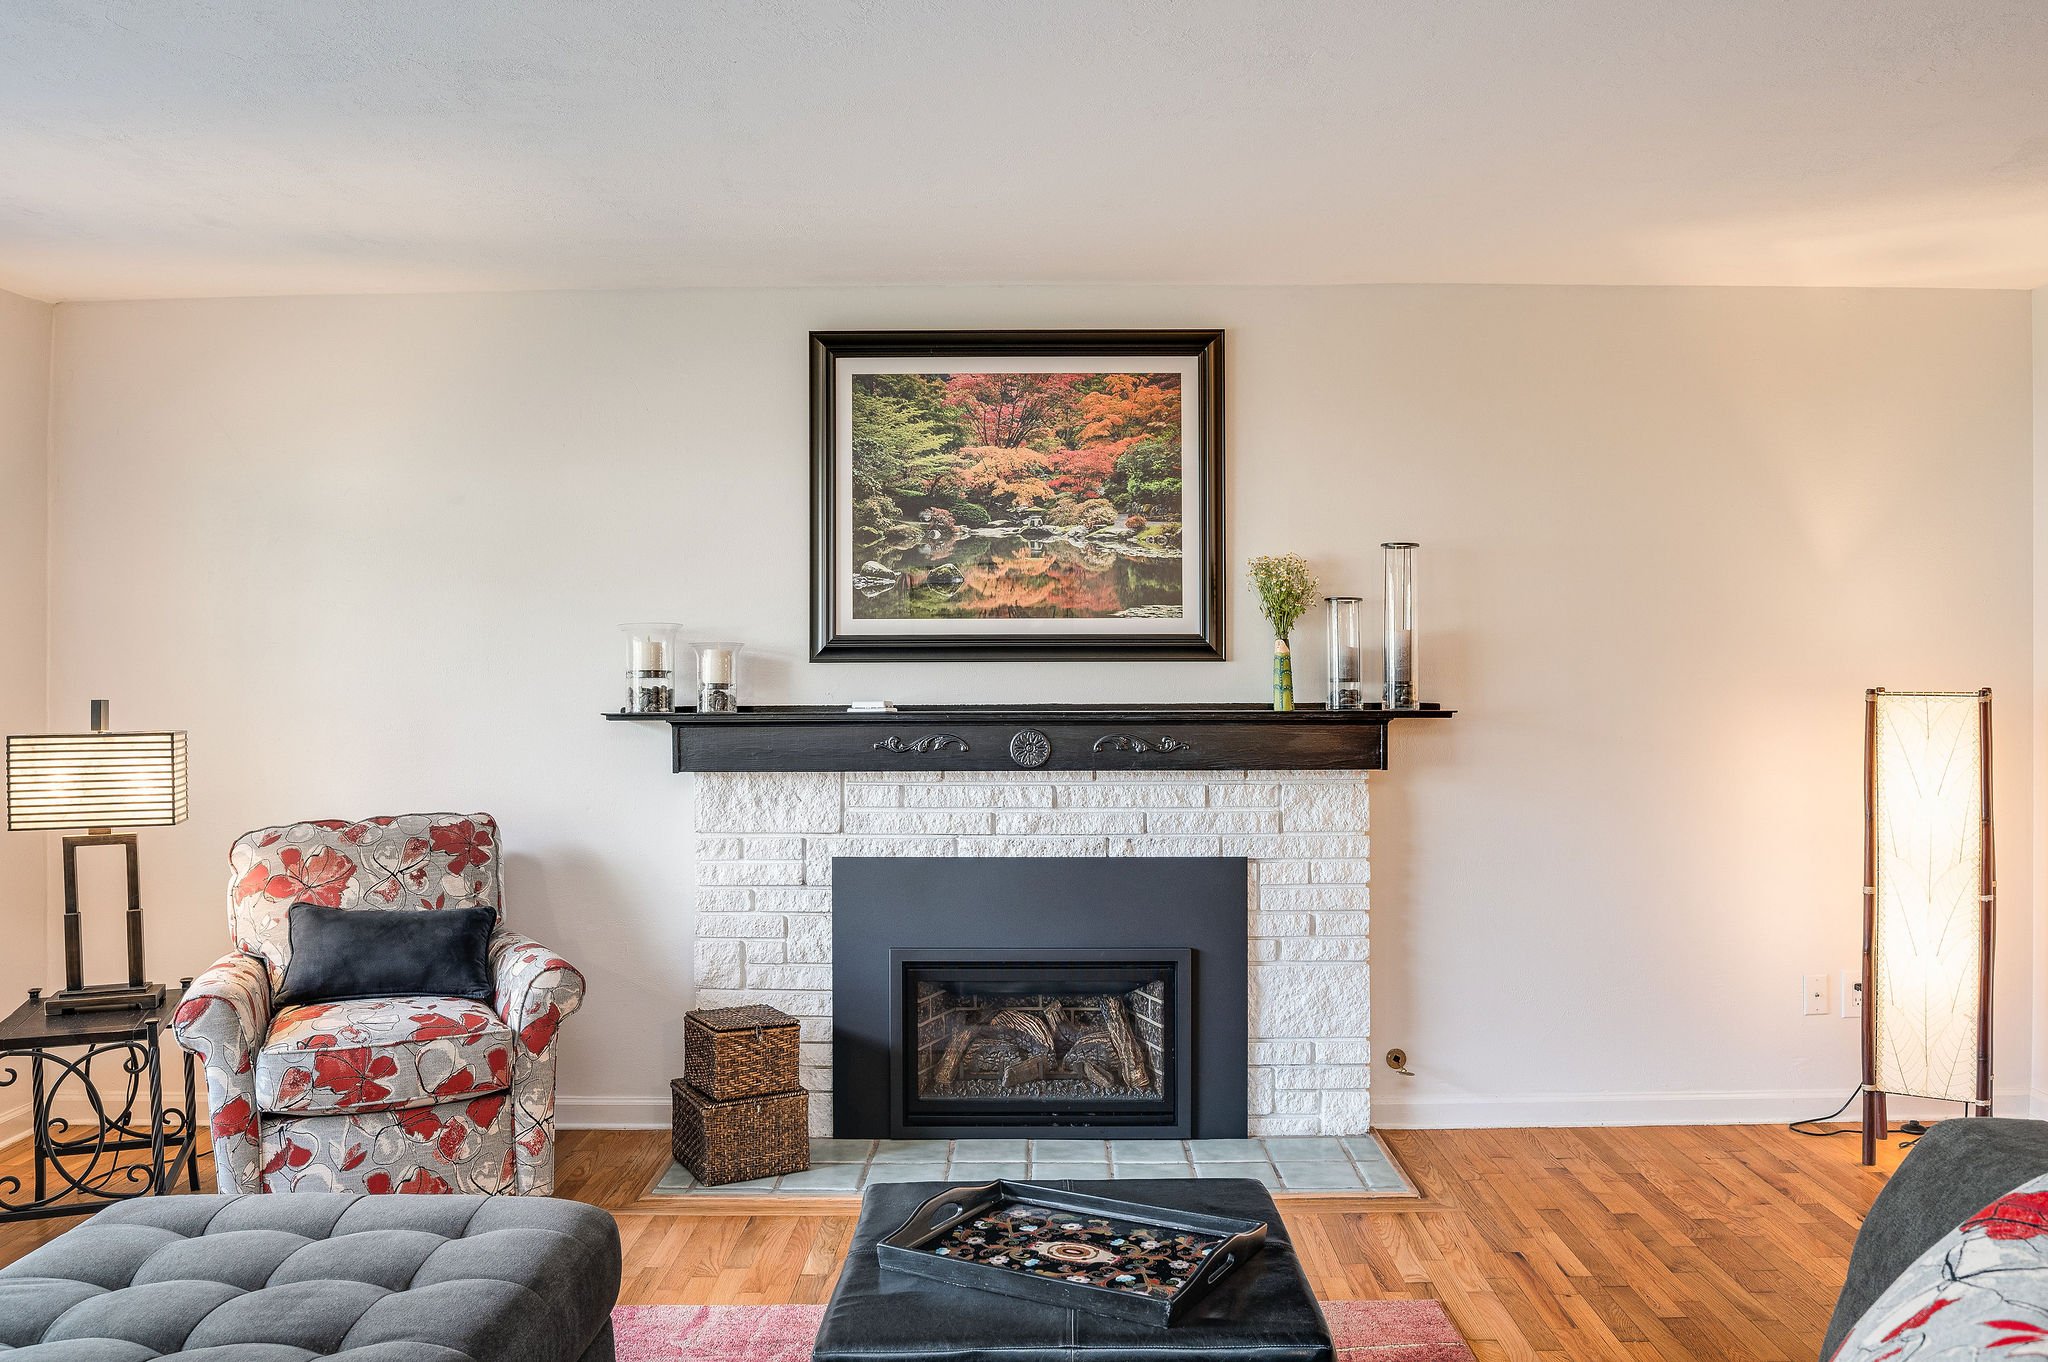 The sleek and modern gas fireplace was installed in 2021.